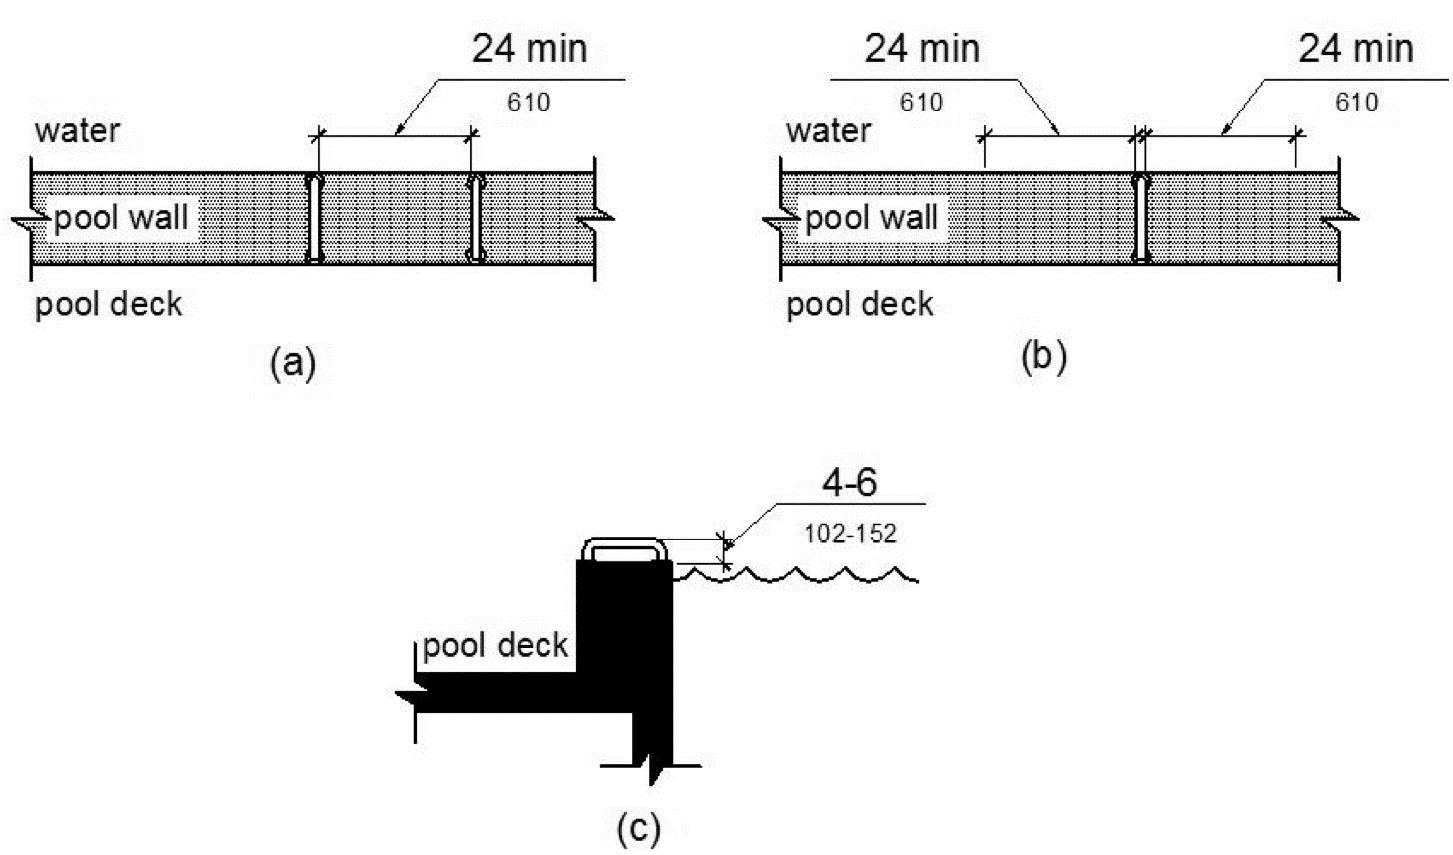 Grab bars at transfer walls are shown perpendicular to the pool wall and extending the full depth of the transfer wall.  Figure (a) shows in plan view two grab bars with a clearance between them of 24 inches minimum.  Figure (b) shows in plan view one grab bar with a clearance of 24 inches minimum on both sides.  Figure (c) shows in side elevation a height of the grab bar gripping surface 4 to 6 inches above the wall, measured to the top of the gripping surface.